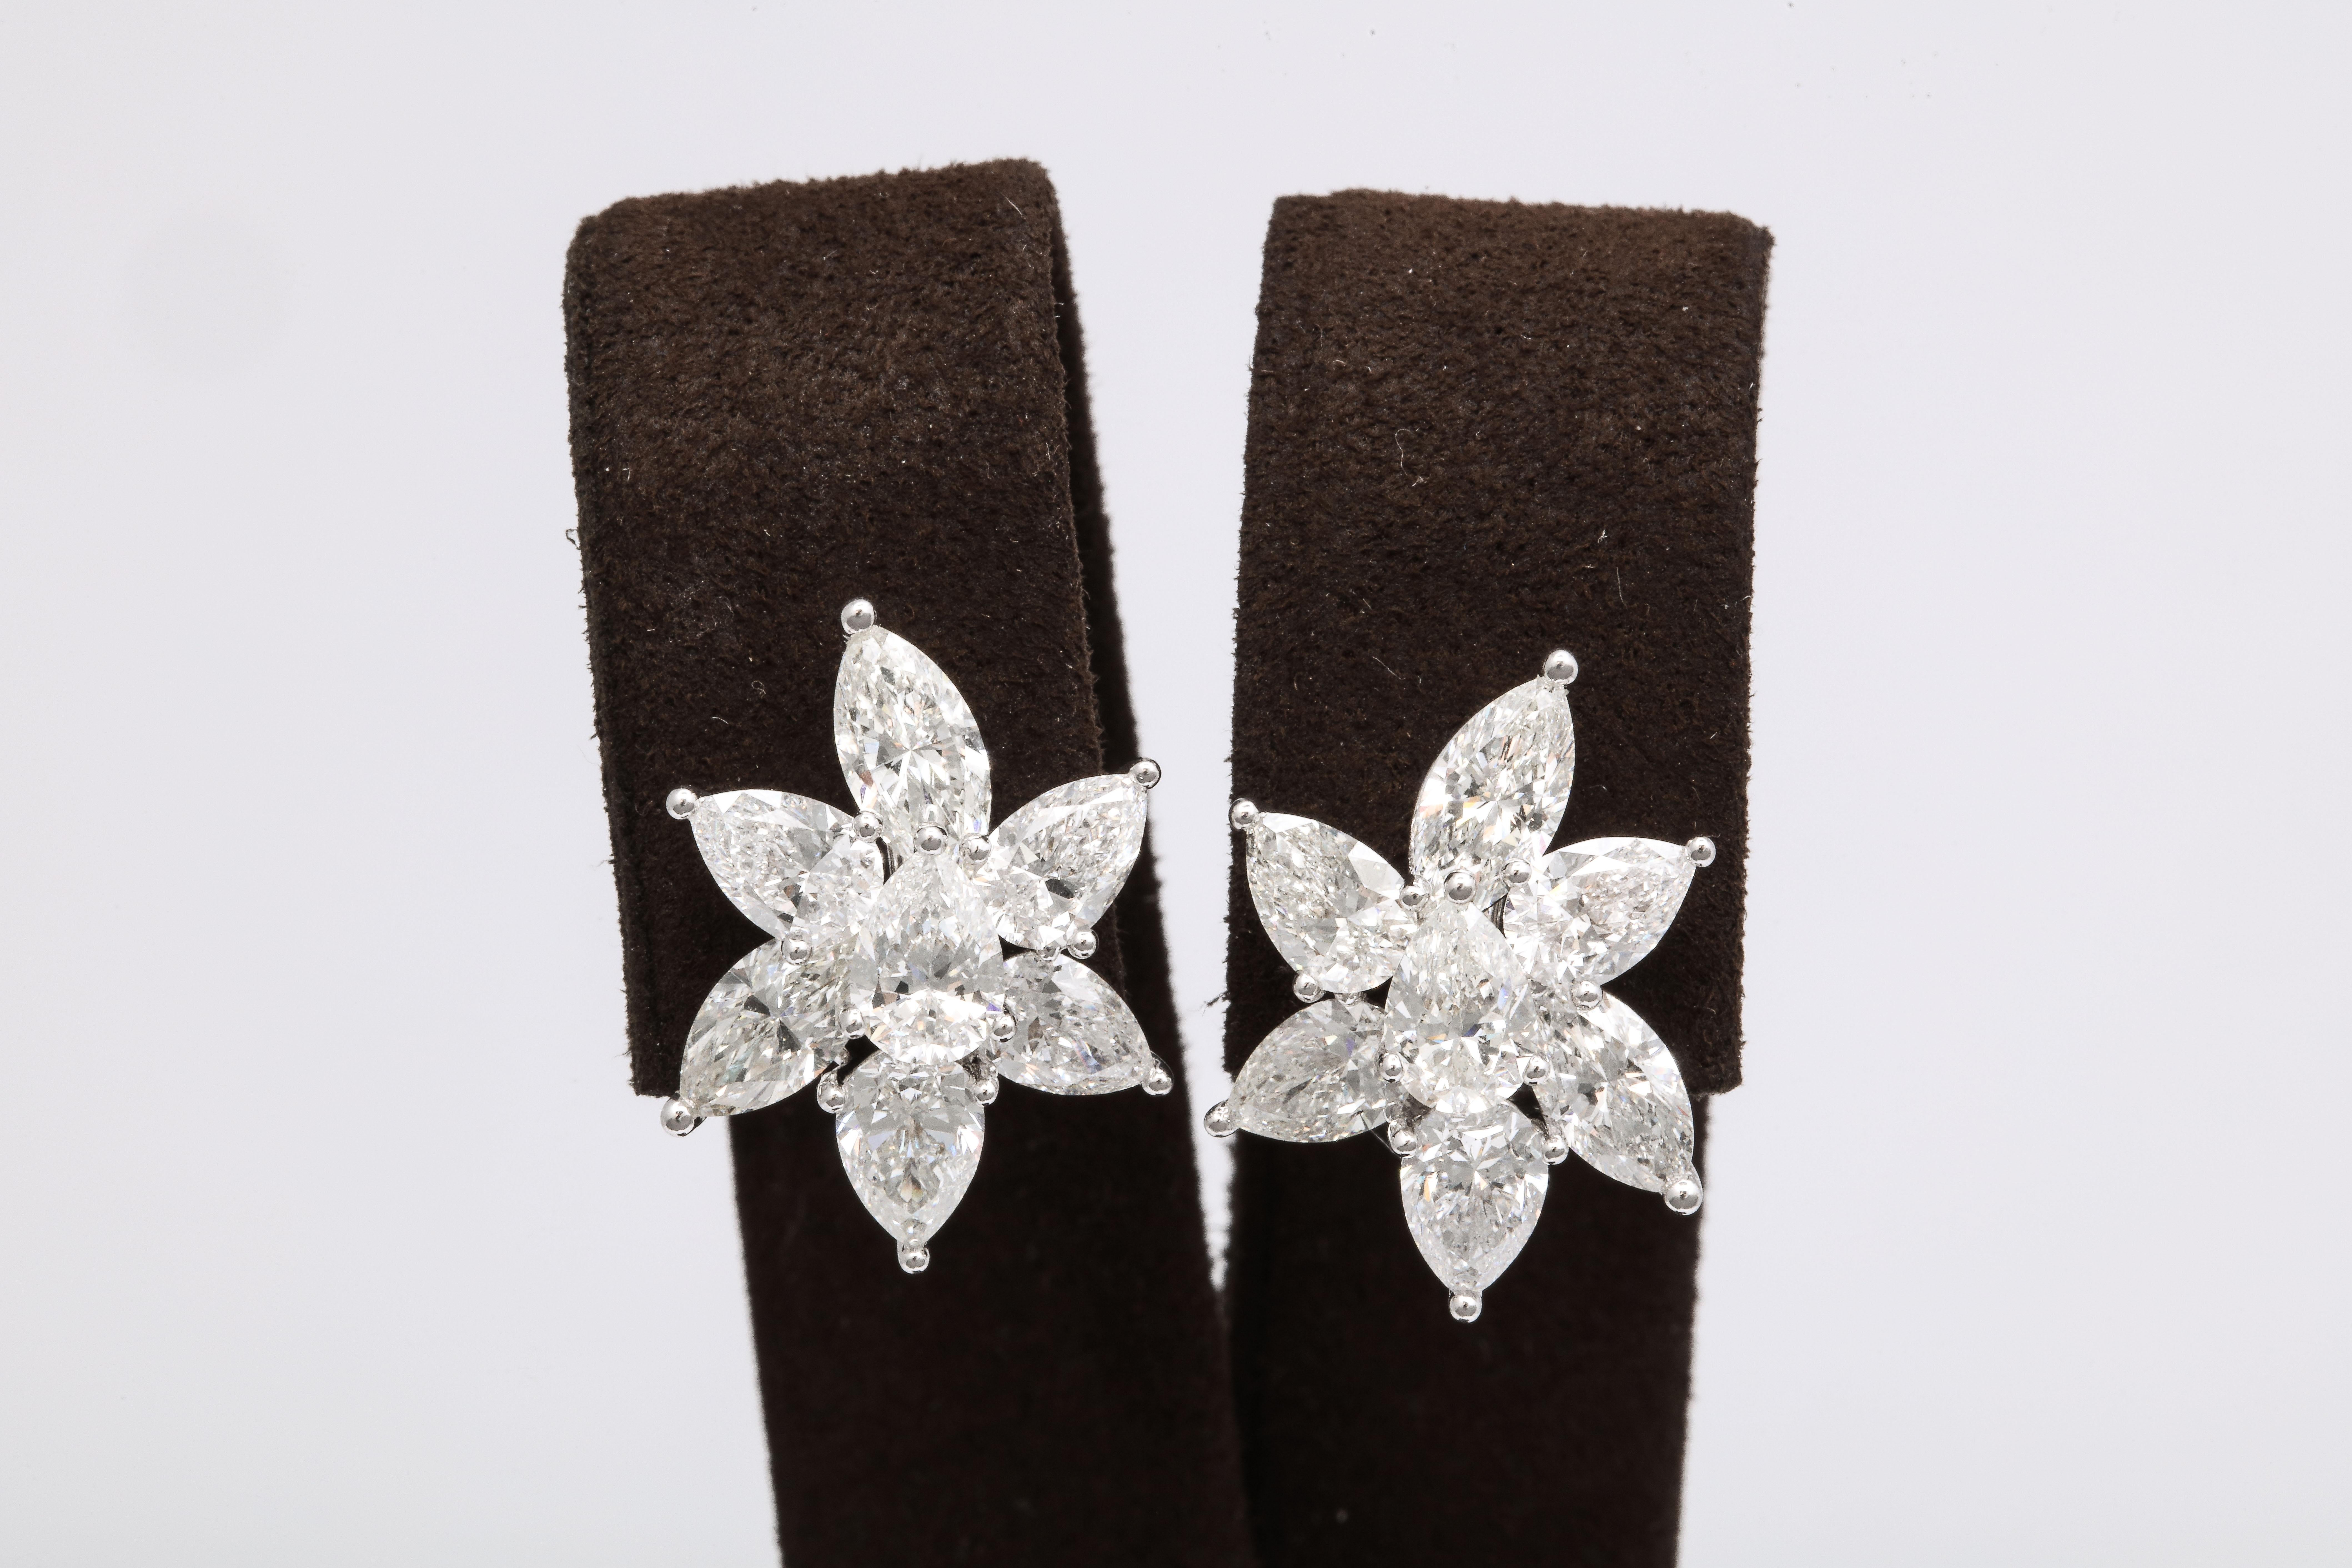 
The perfect pair of cluster earrings!

7.02 carats of white pear and marquise shape diamonds set in 18k white gold. 

The diamonds are all set on different height levels allowing for these earrings to really POP!

Full of sparkle, these earrings